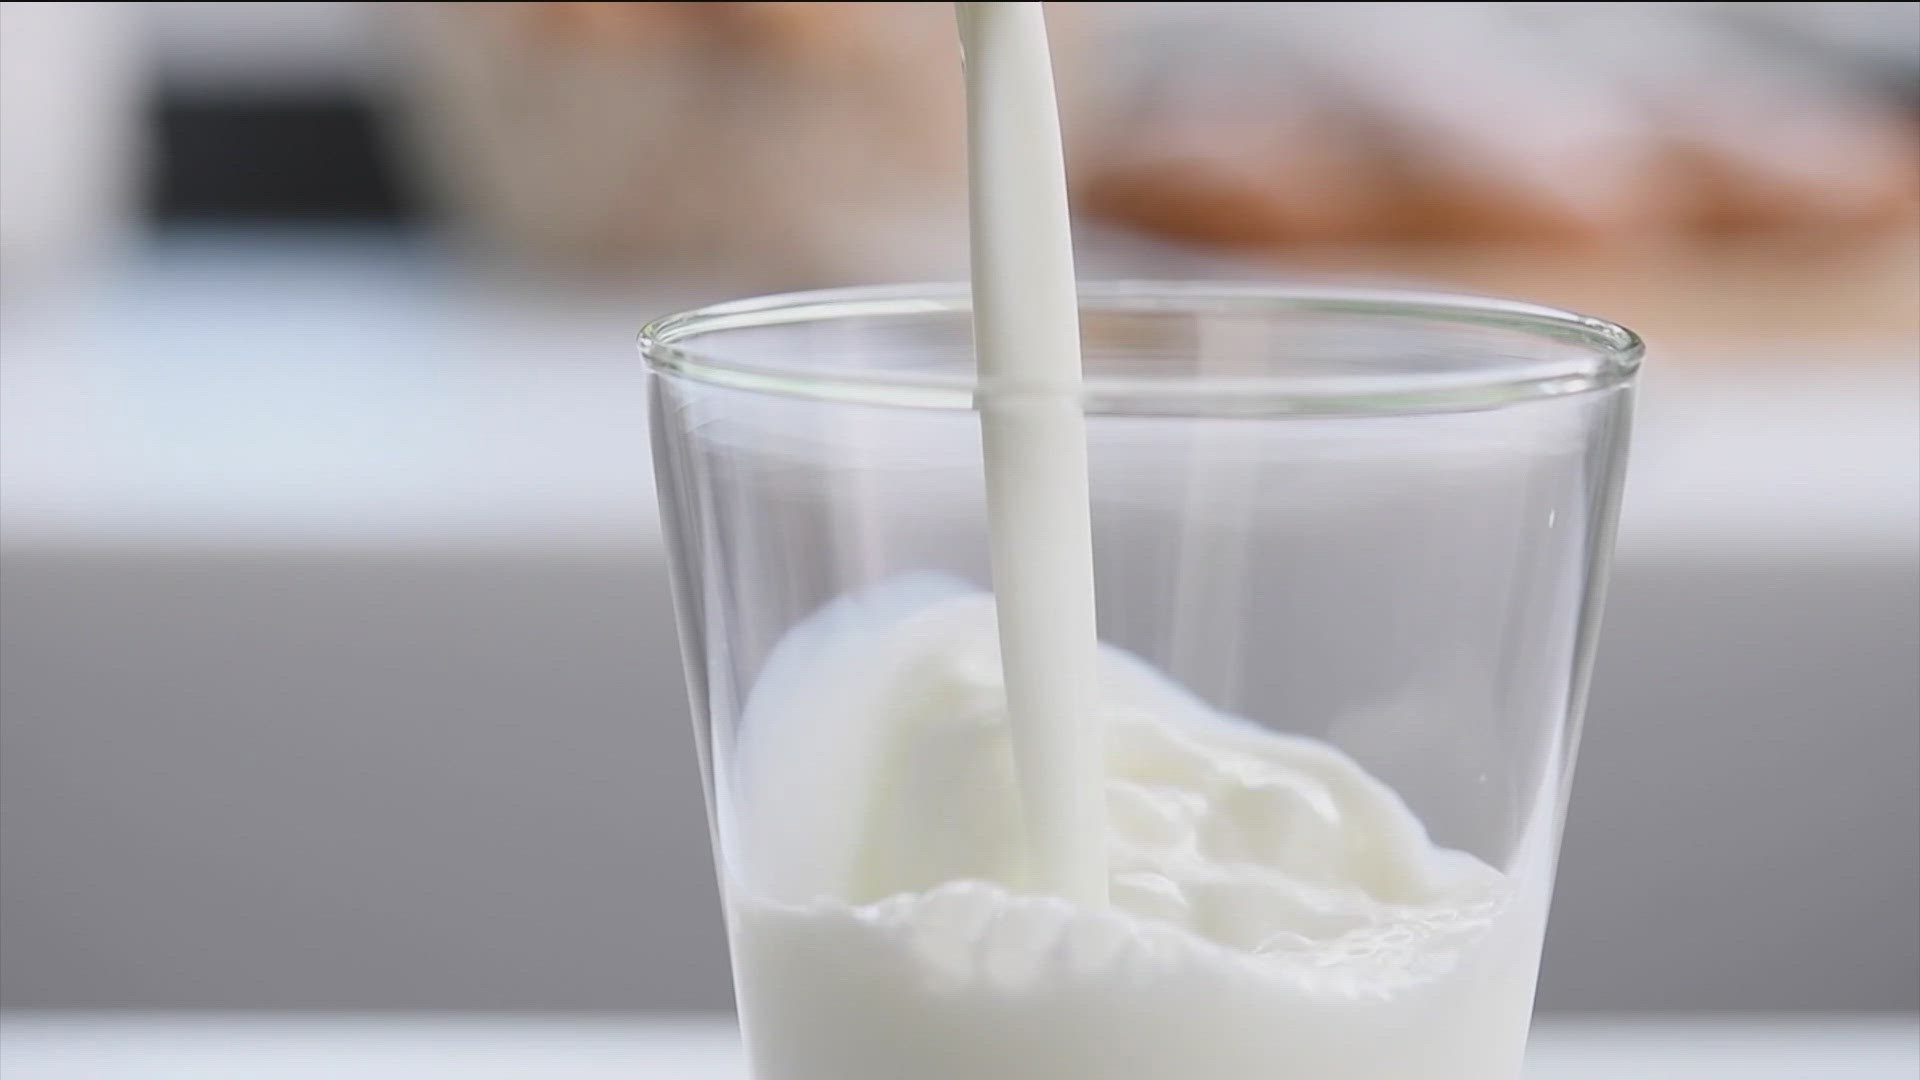 Recently, federal guidelines have been placed on drinking water to limit the number of PFAS, or forever chemicals. What about other drinks like milk?